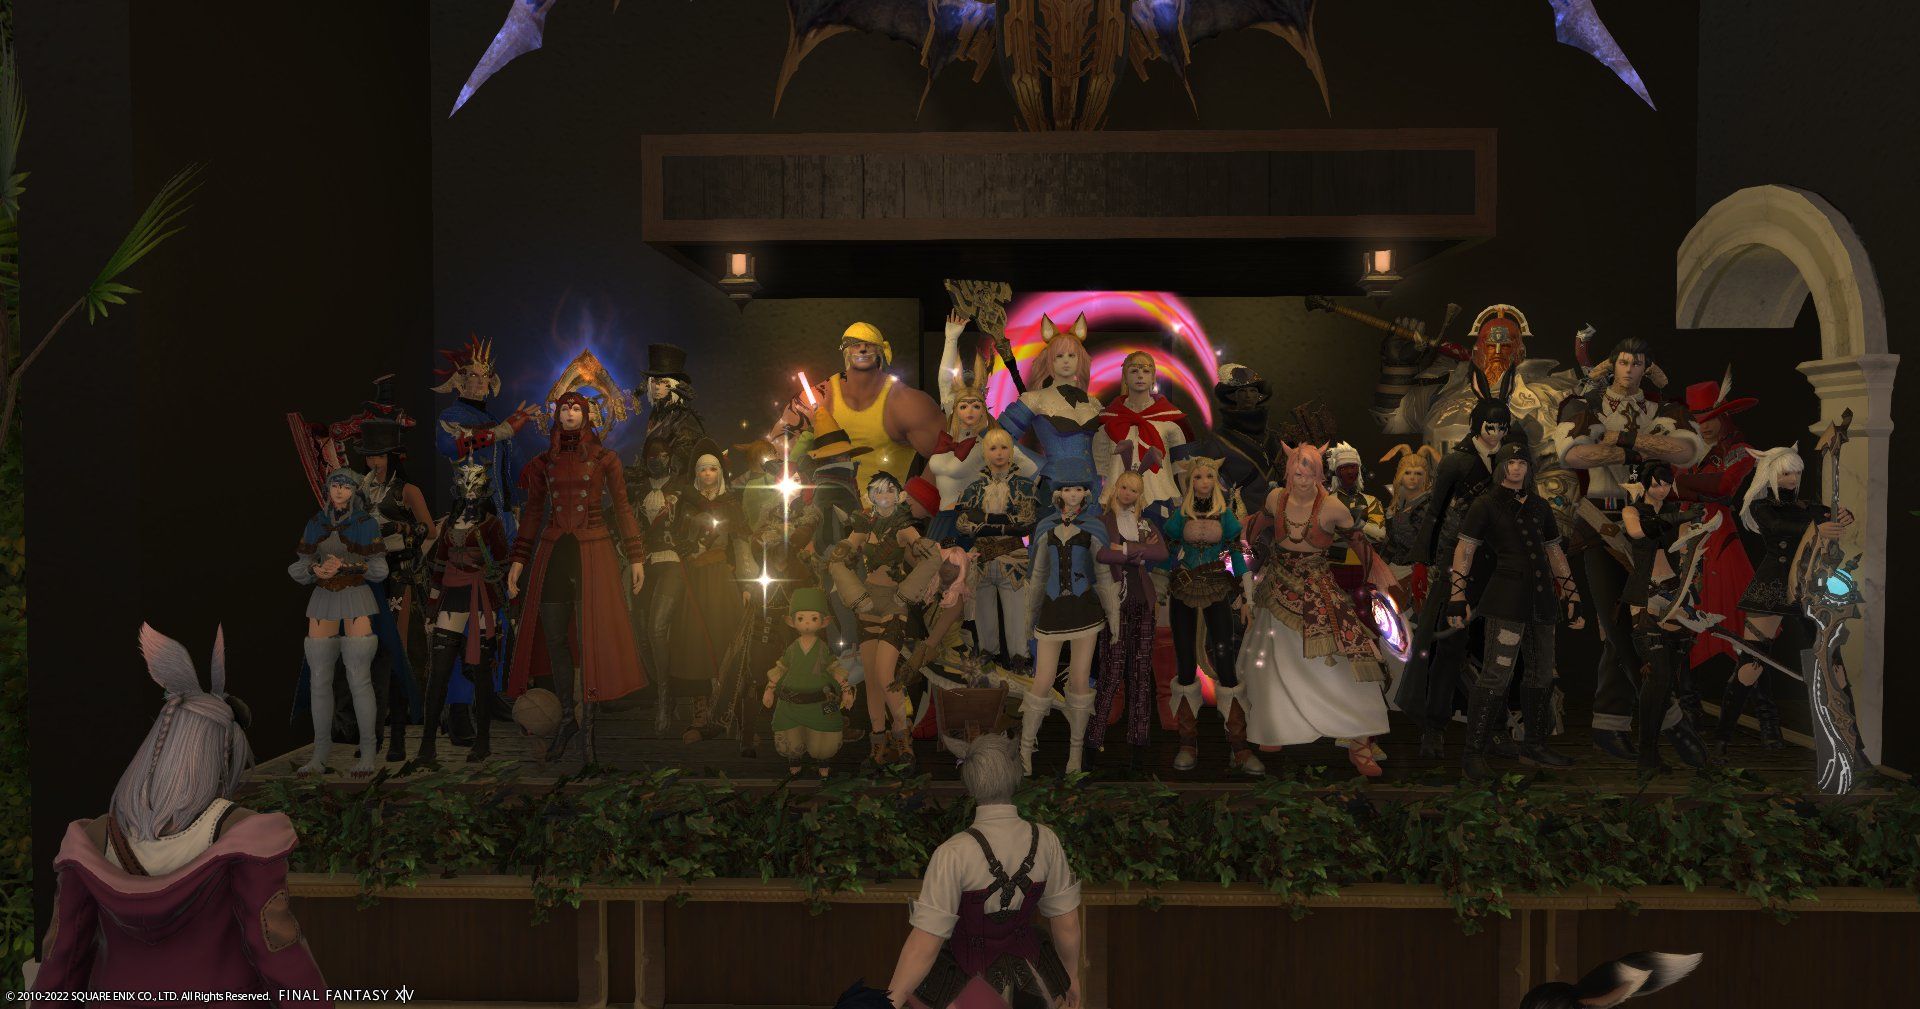 Final Fantasy 14 Calia Balor and other cosplayers on stage at LunarCon